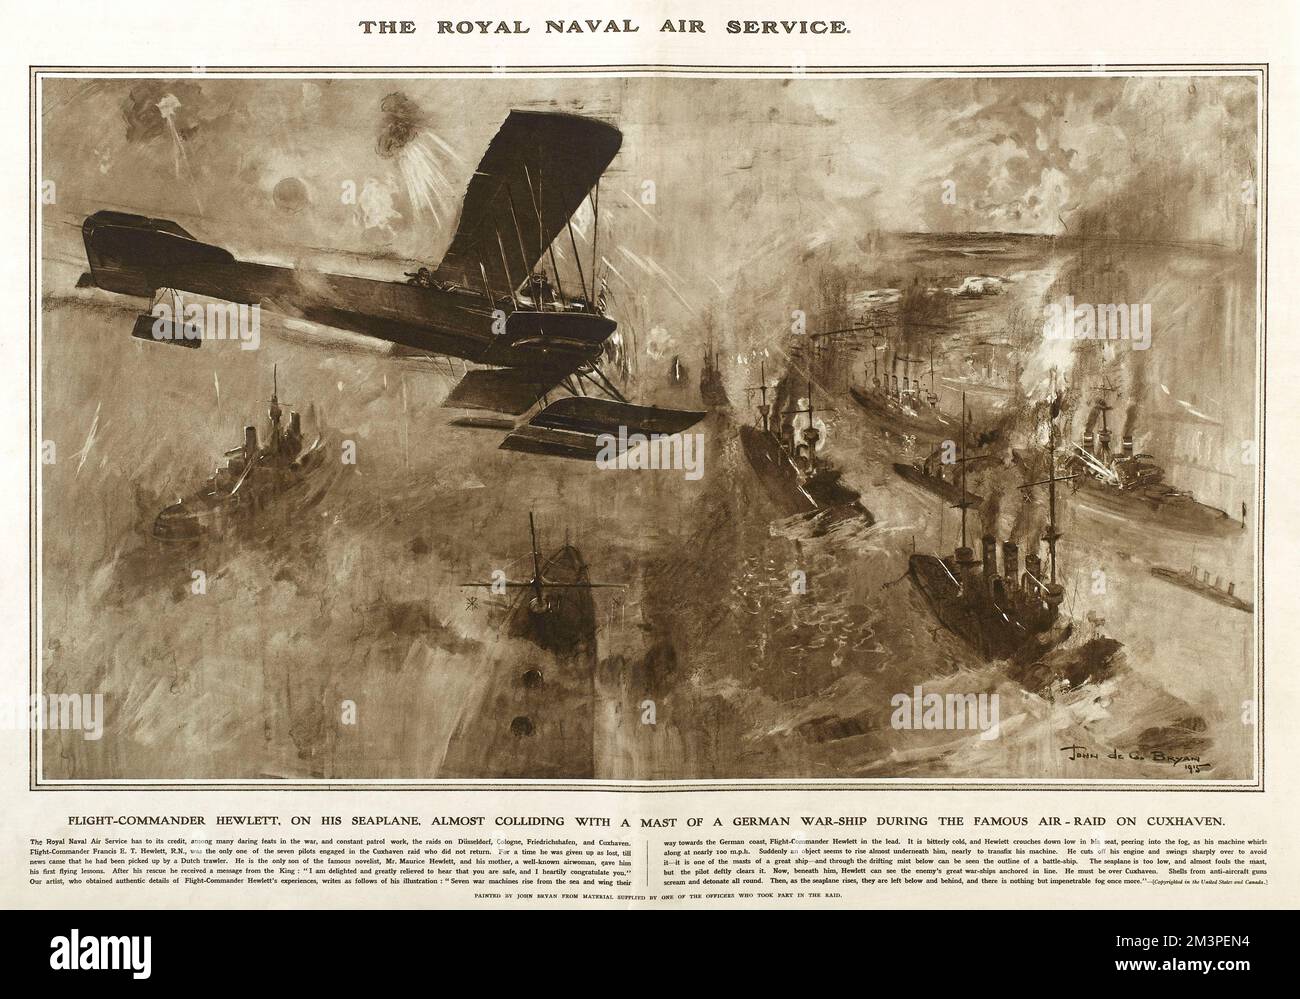 Flight Commander Hewlett of the Royal Naval Air Service (before the RAF was formed) almost colliding with a mast of a German warship during the air raid on Cuxhaven on Christmas Day 1914.  Reproduction of a painting by John Bryan in Great War Deeds, a special panorama supplement produced by the Illustrated London News in 1915, featuring heroic actions of the First World War.      Date: 1914 Stock Photo